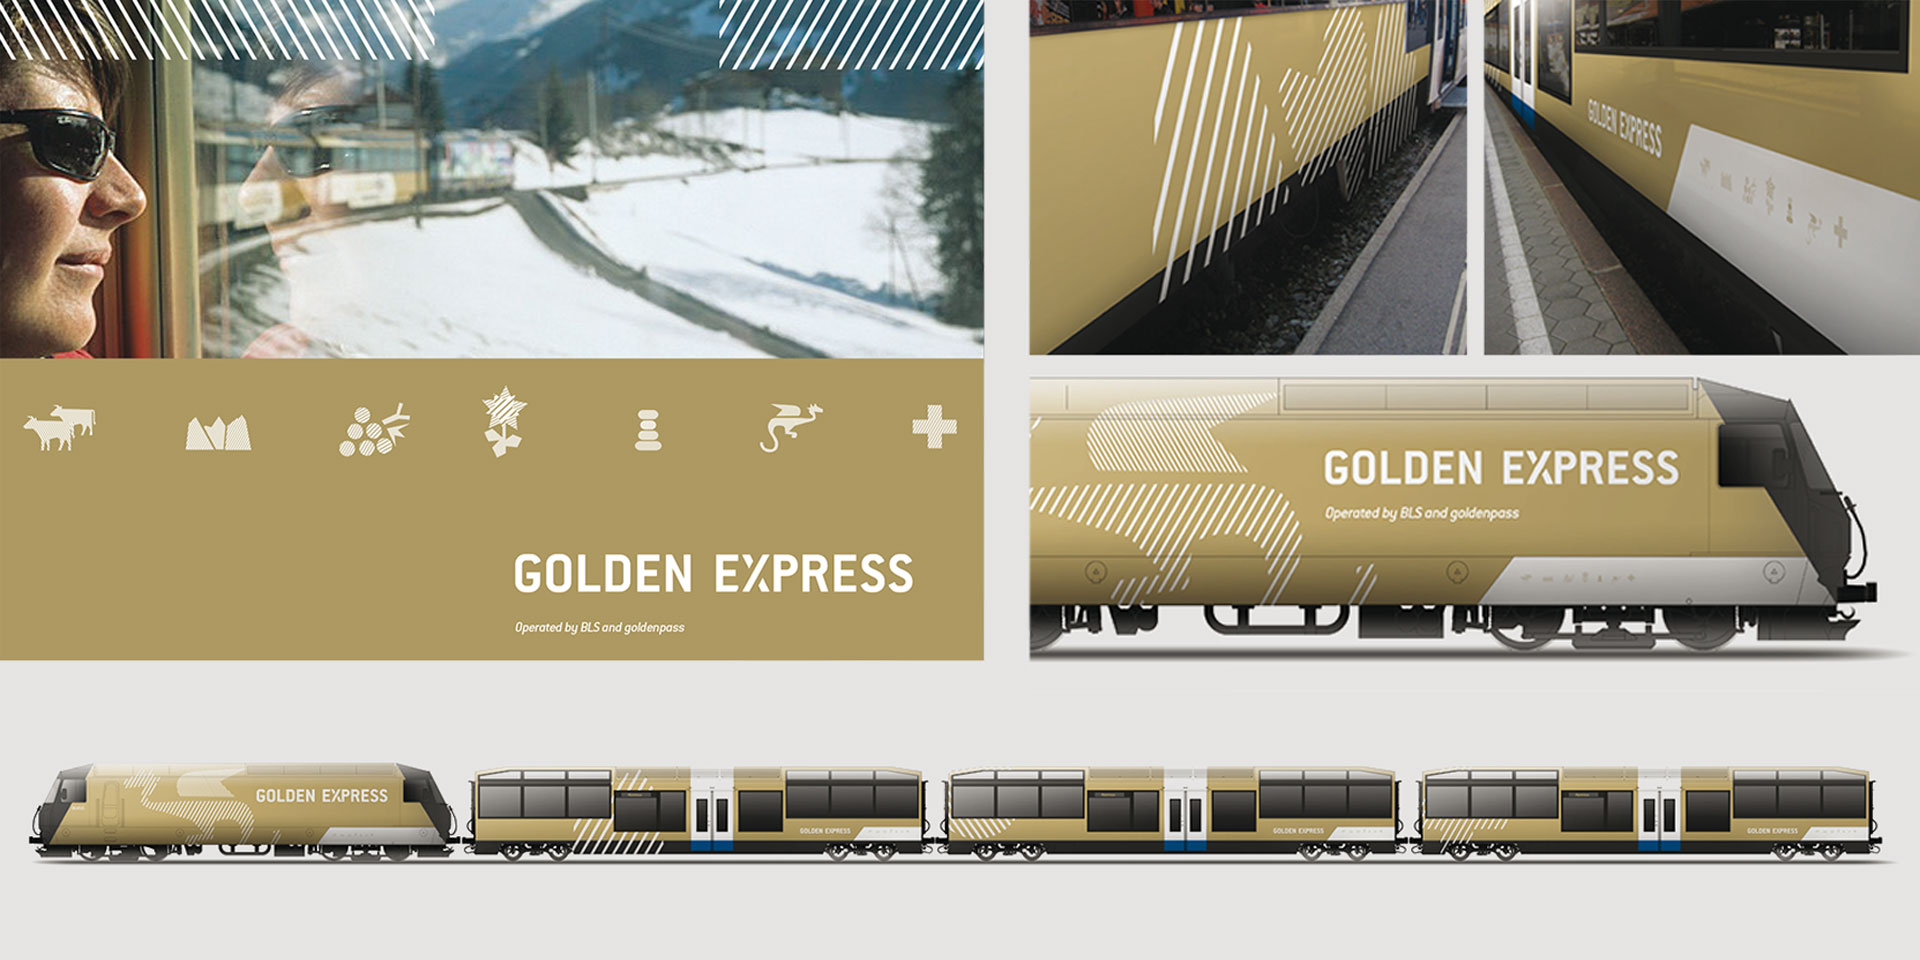 02 milani design consulting agency Goldenpass golden express bls corporate fashion textile transportation wear